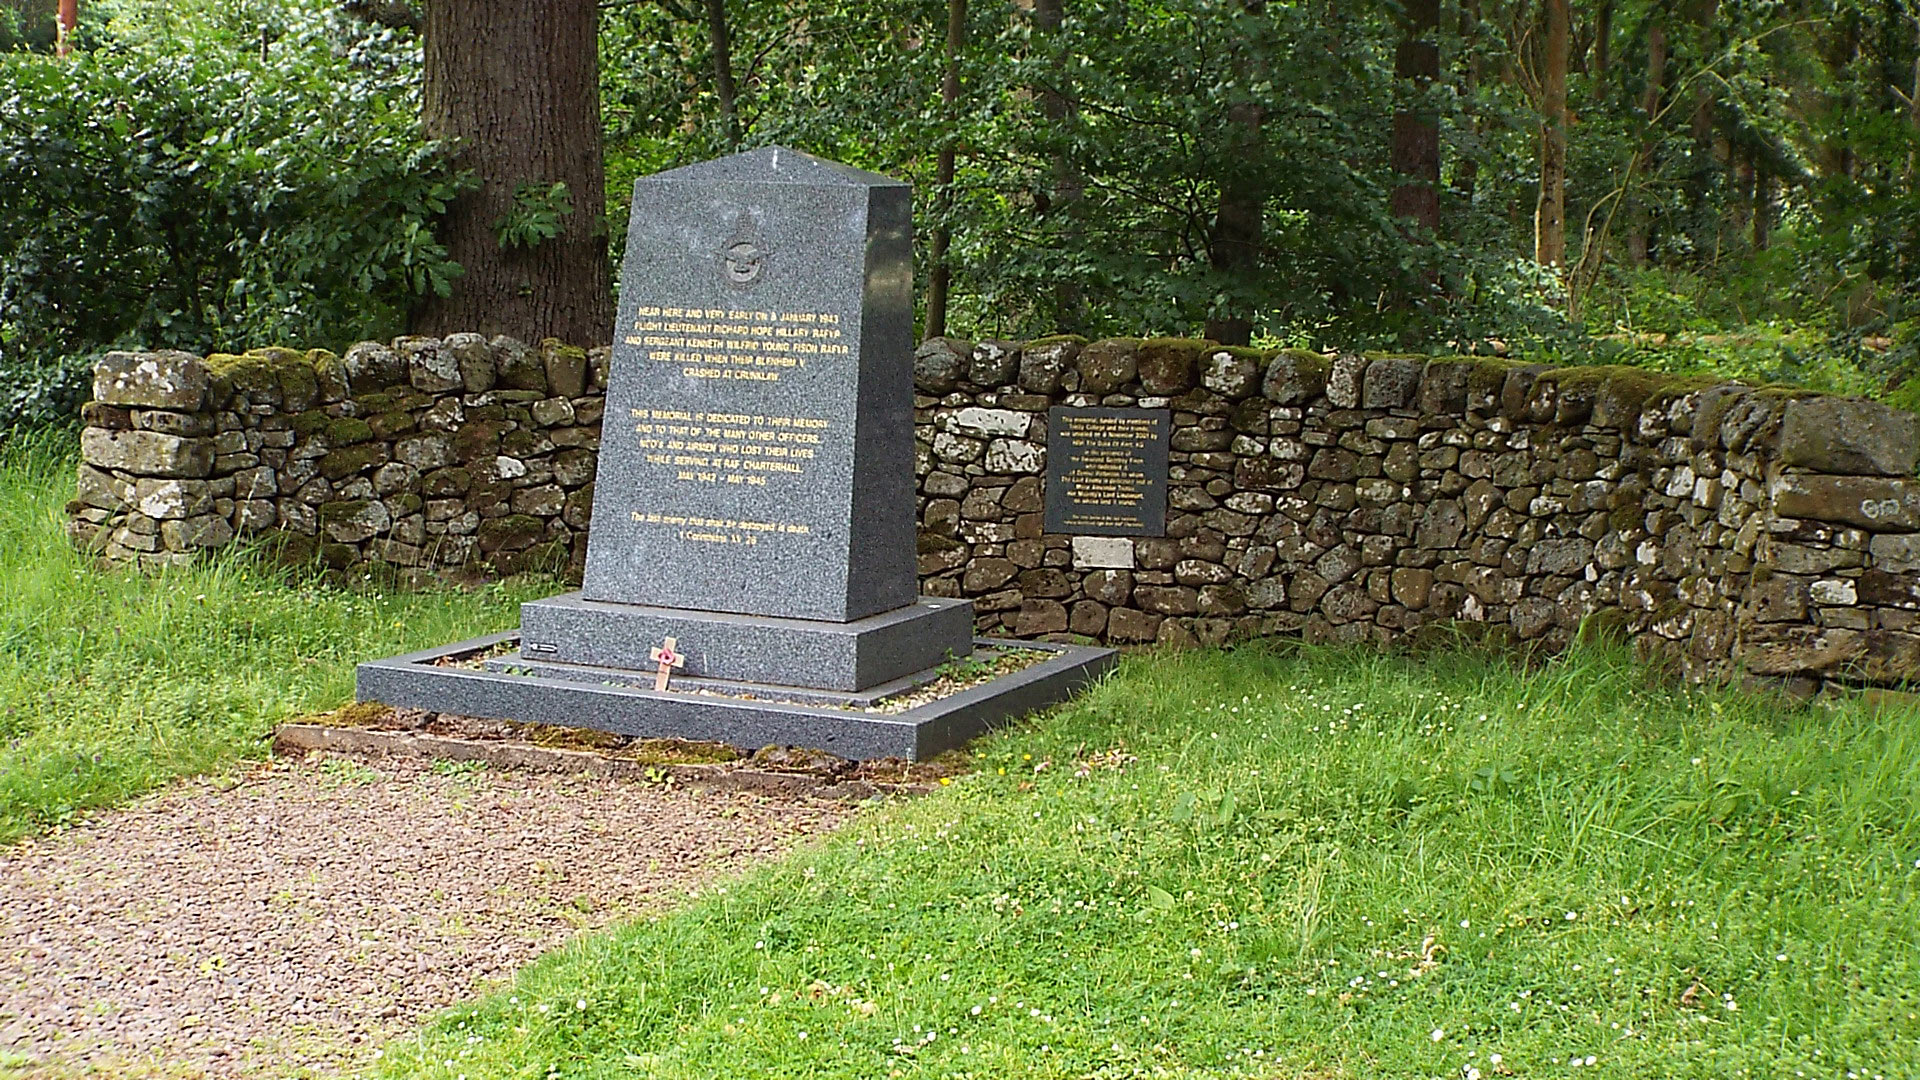 The Memorial to Richard Hilary